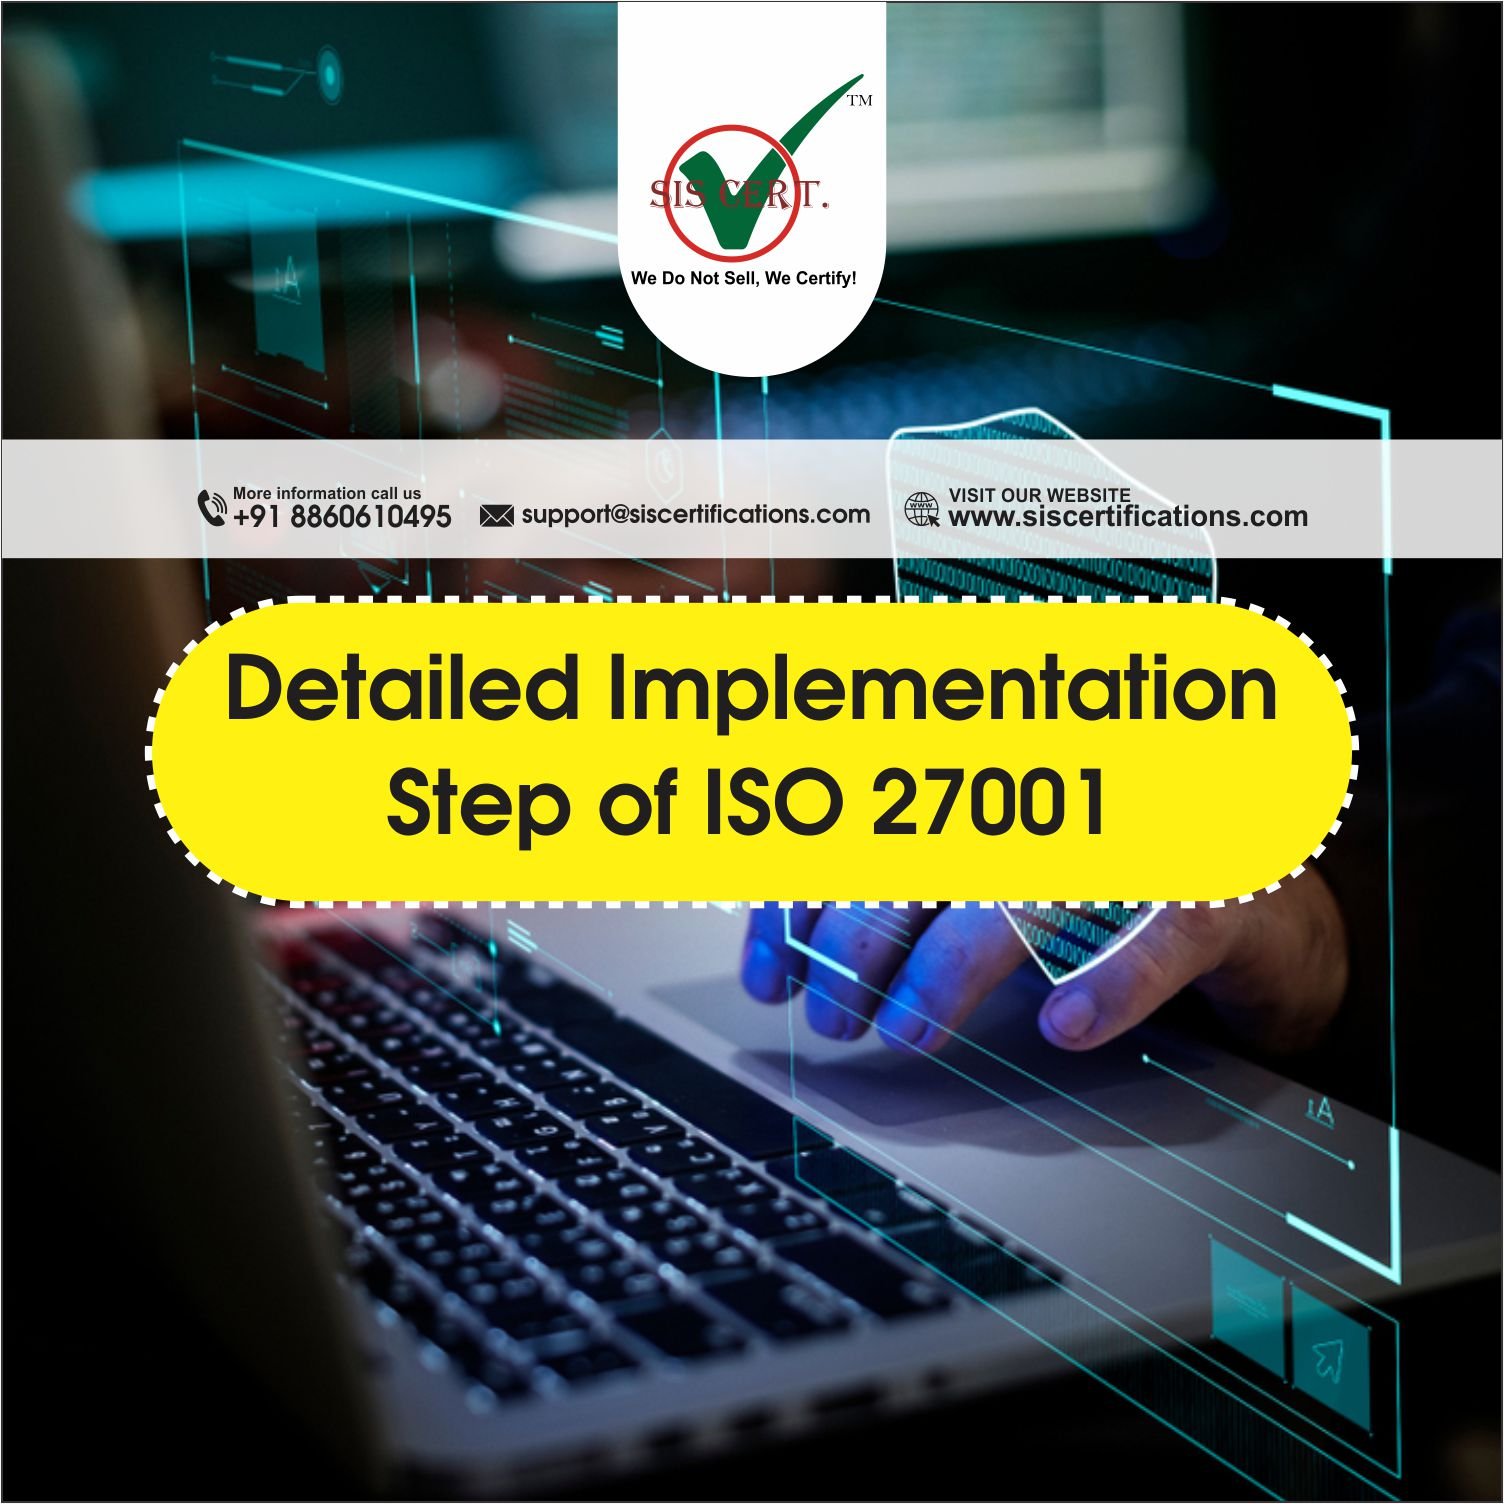 Detailed Implementation Step of ISO 27001